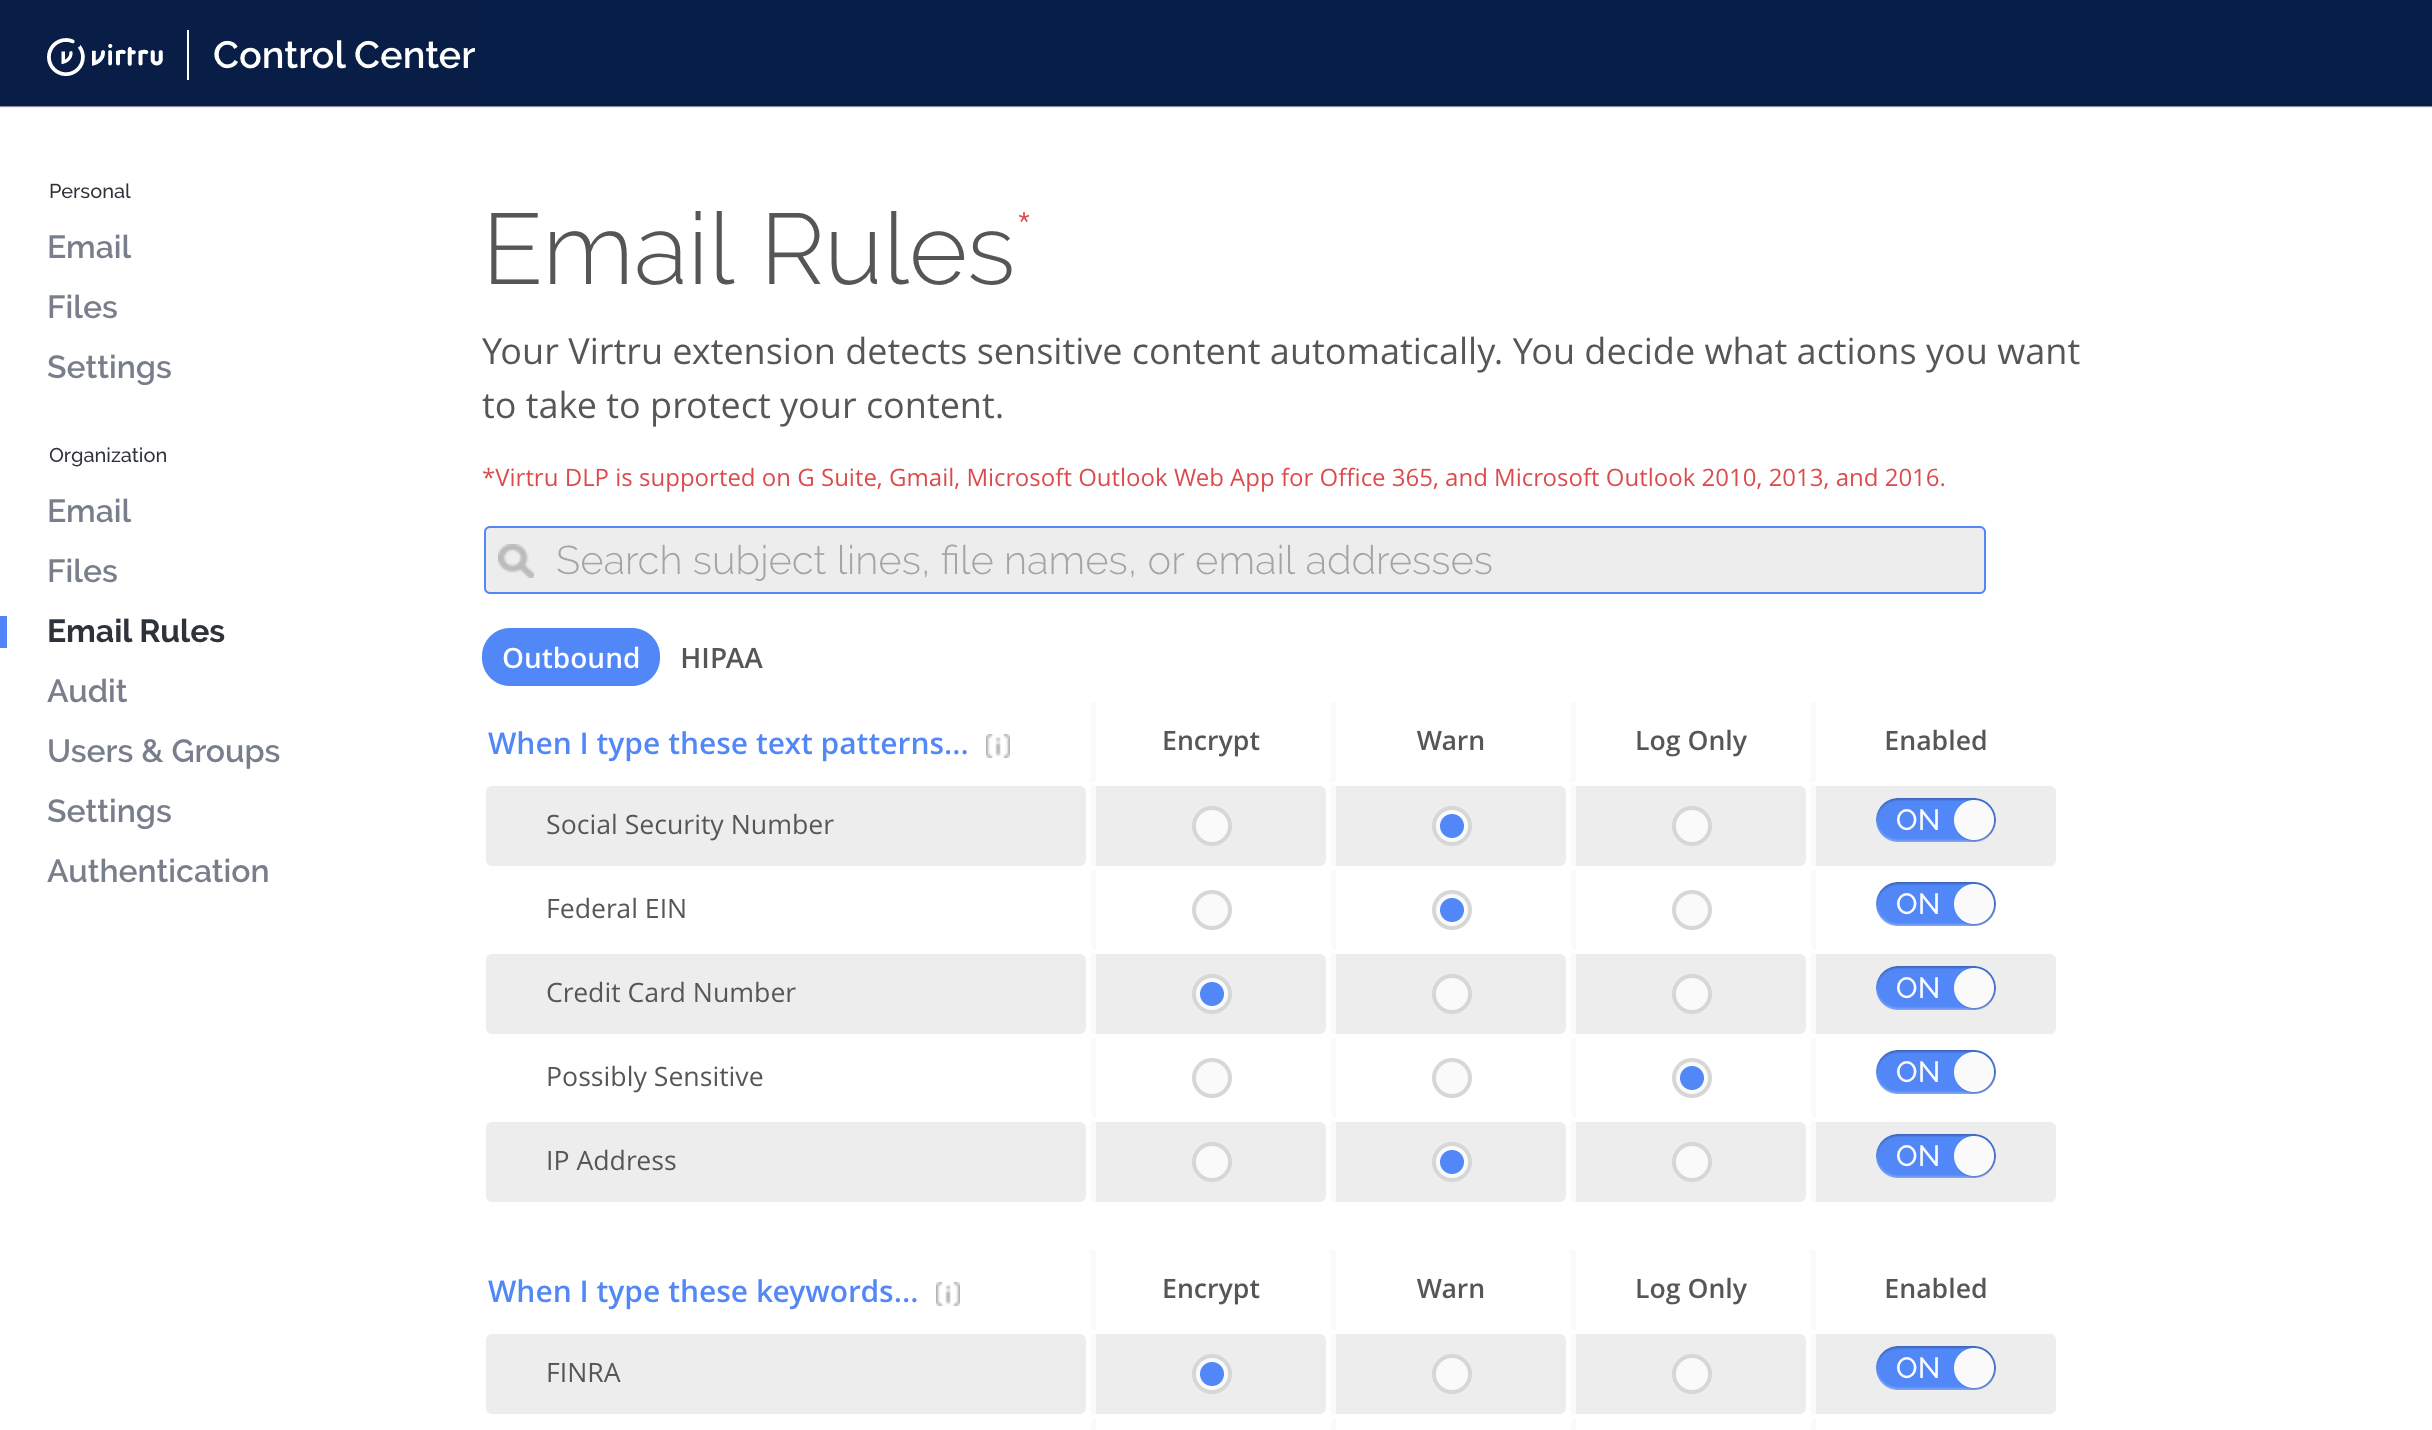 Control Center Email Rules page